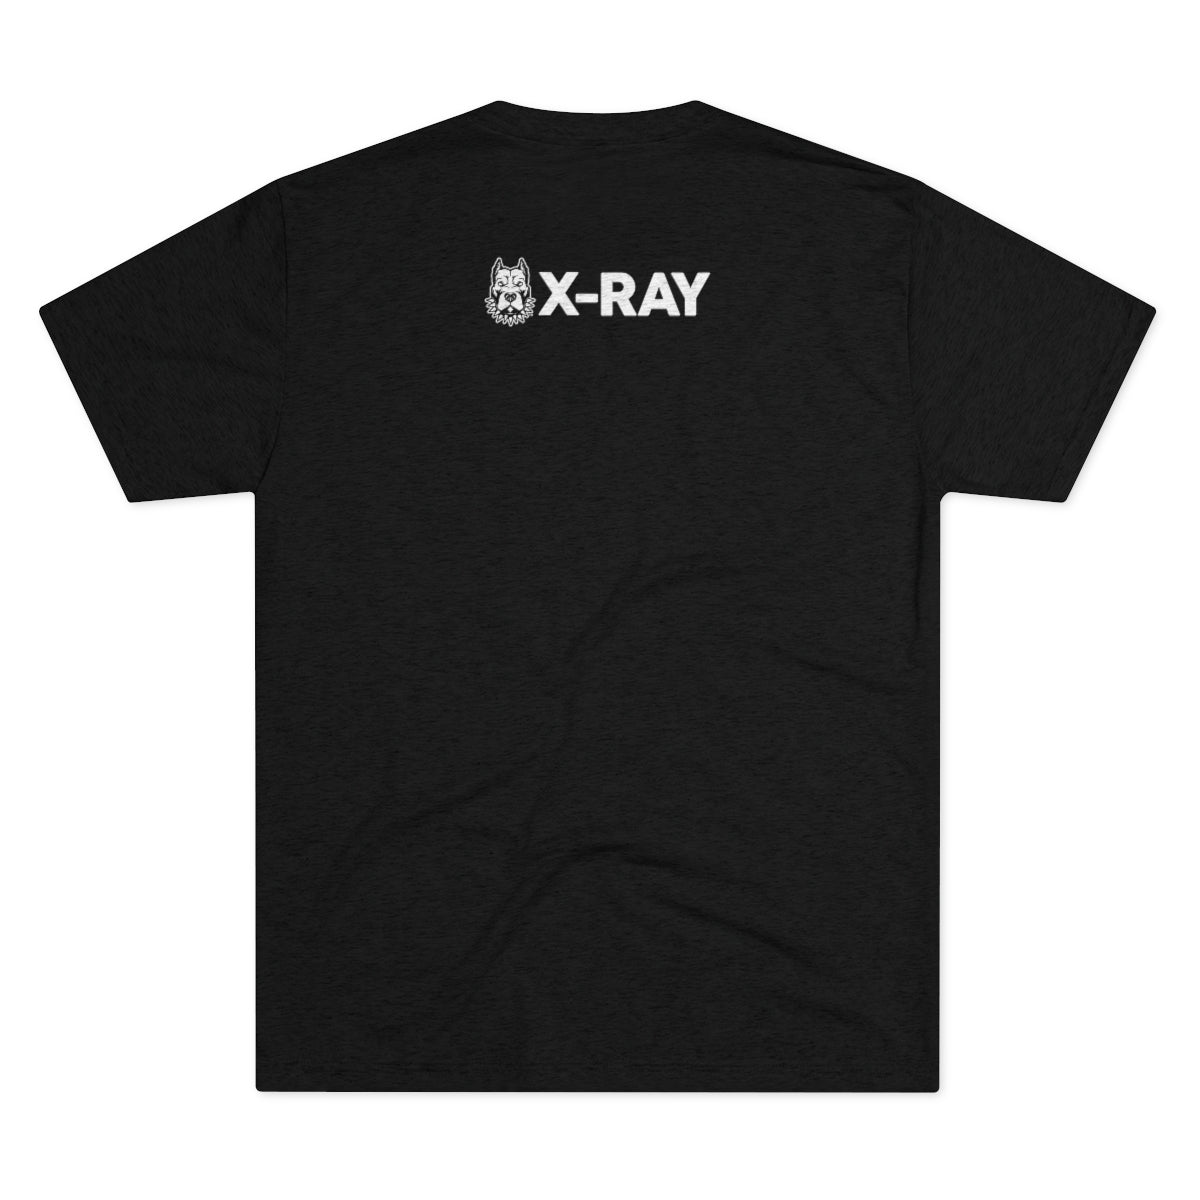 Special Collection – X-Ray: Dog-Run – Unisex Tri-Blend Crew Tee